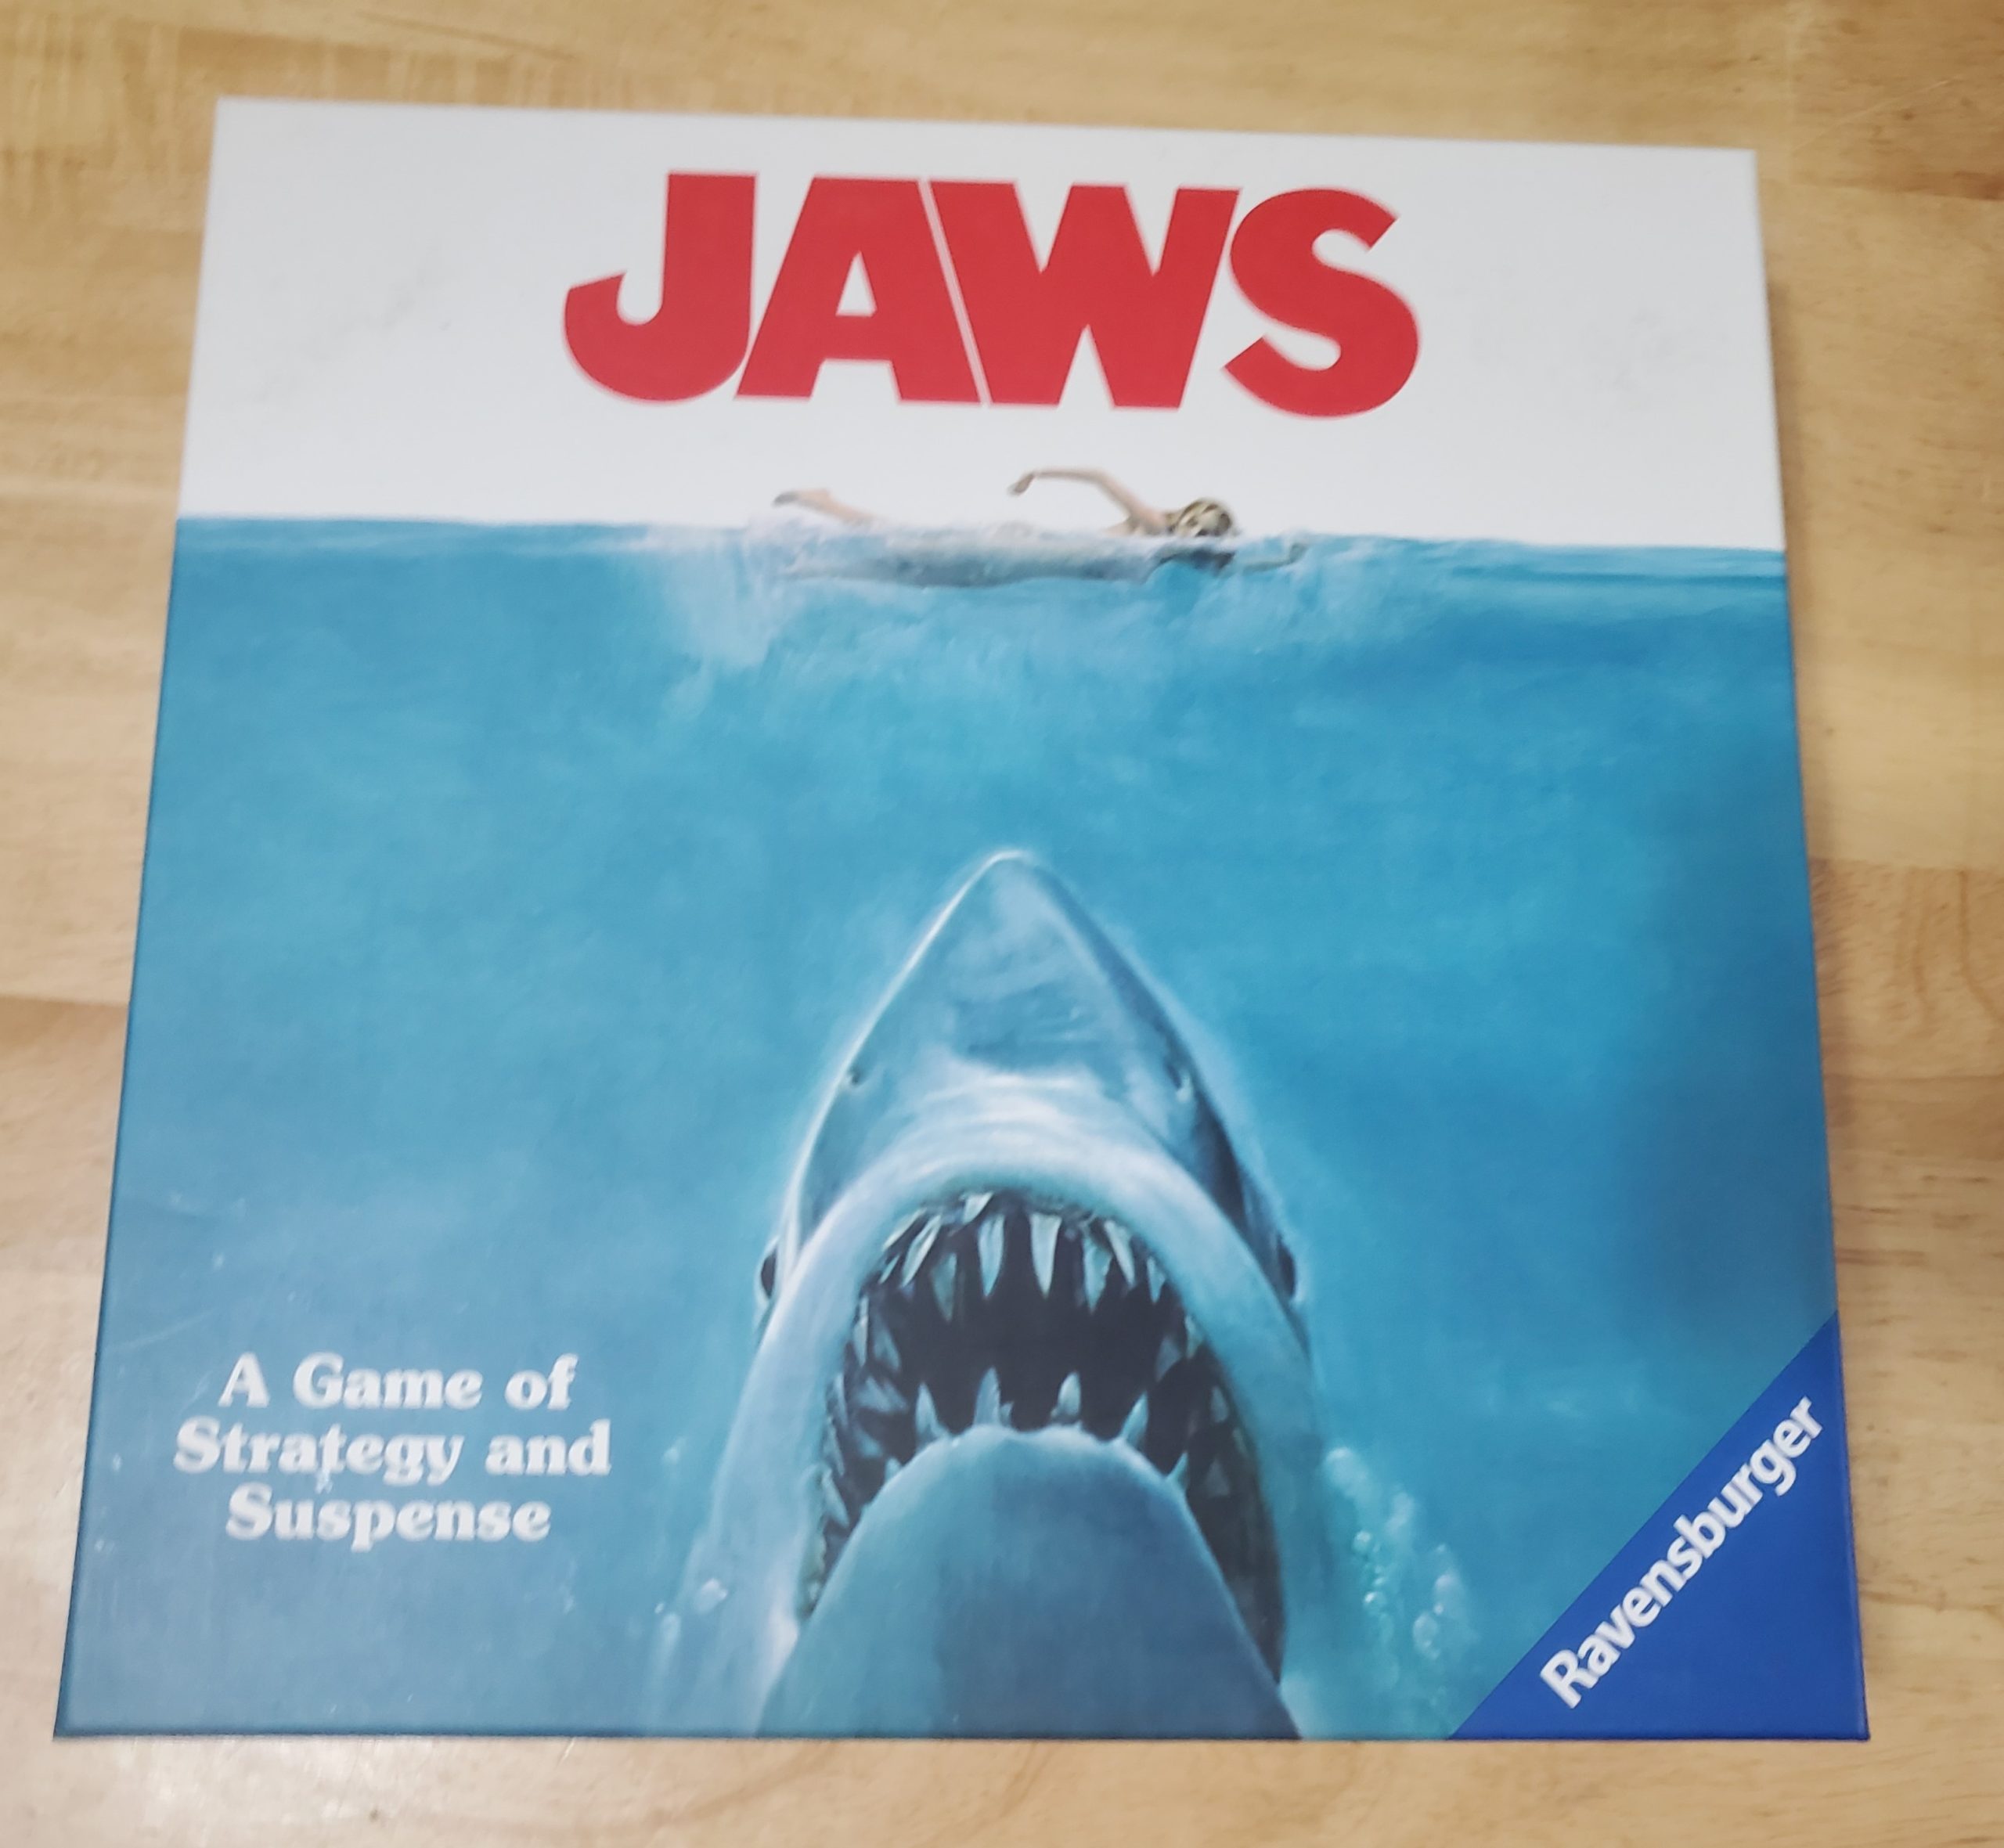 The Jaws Board Game box